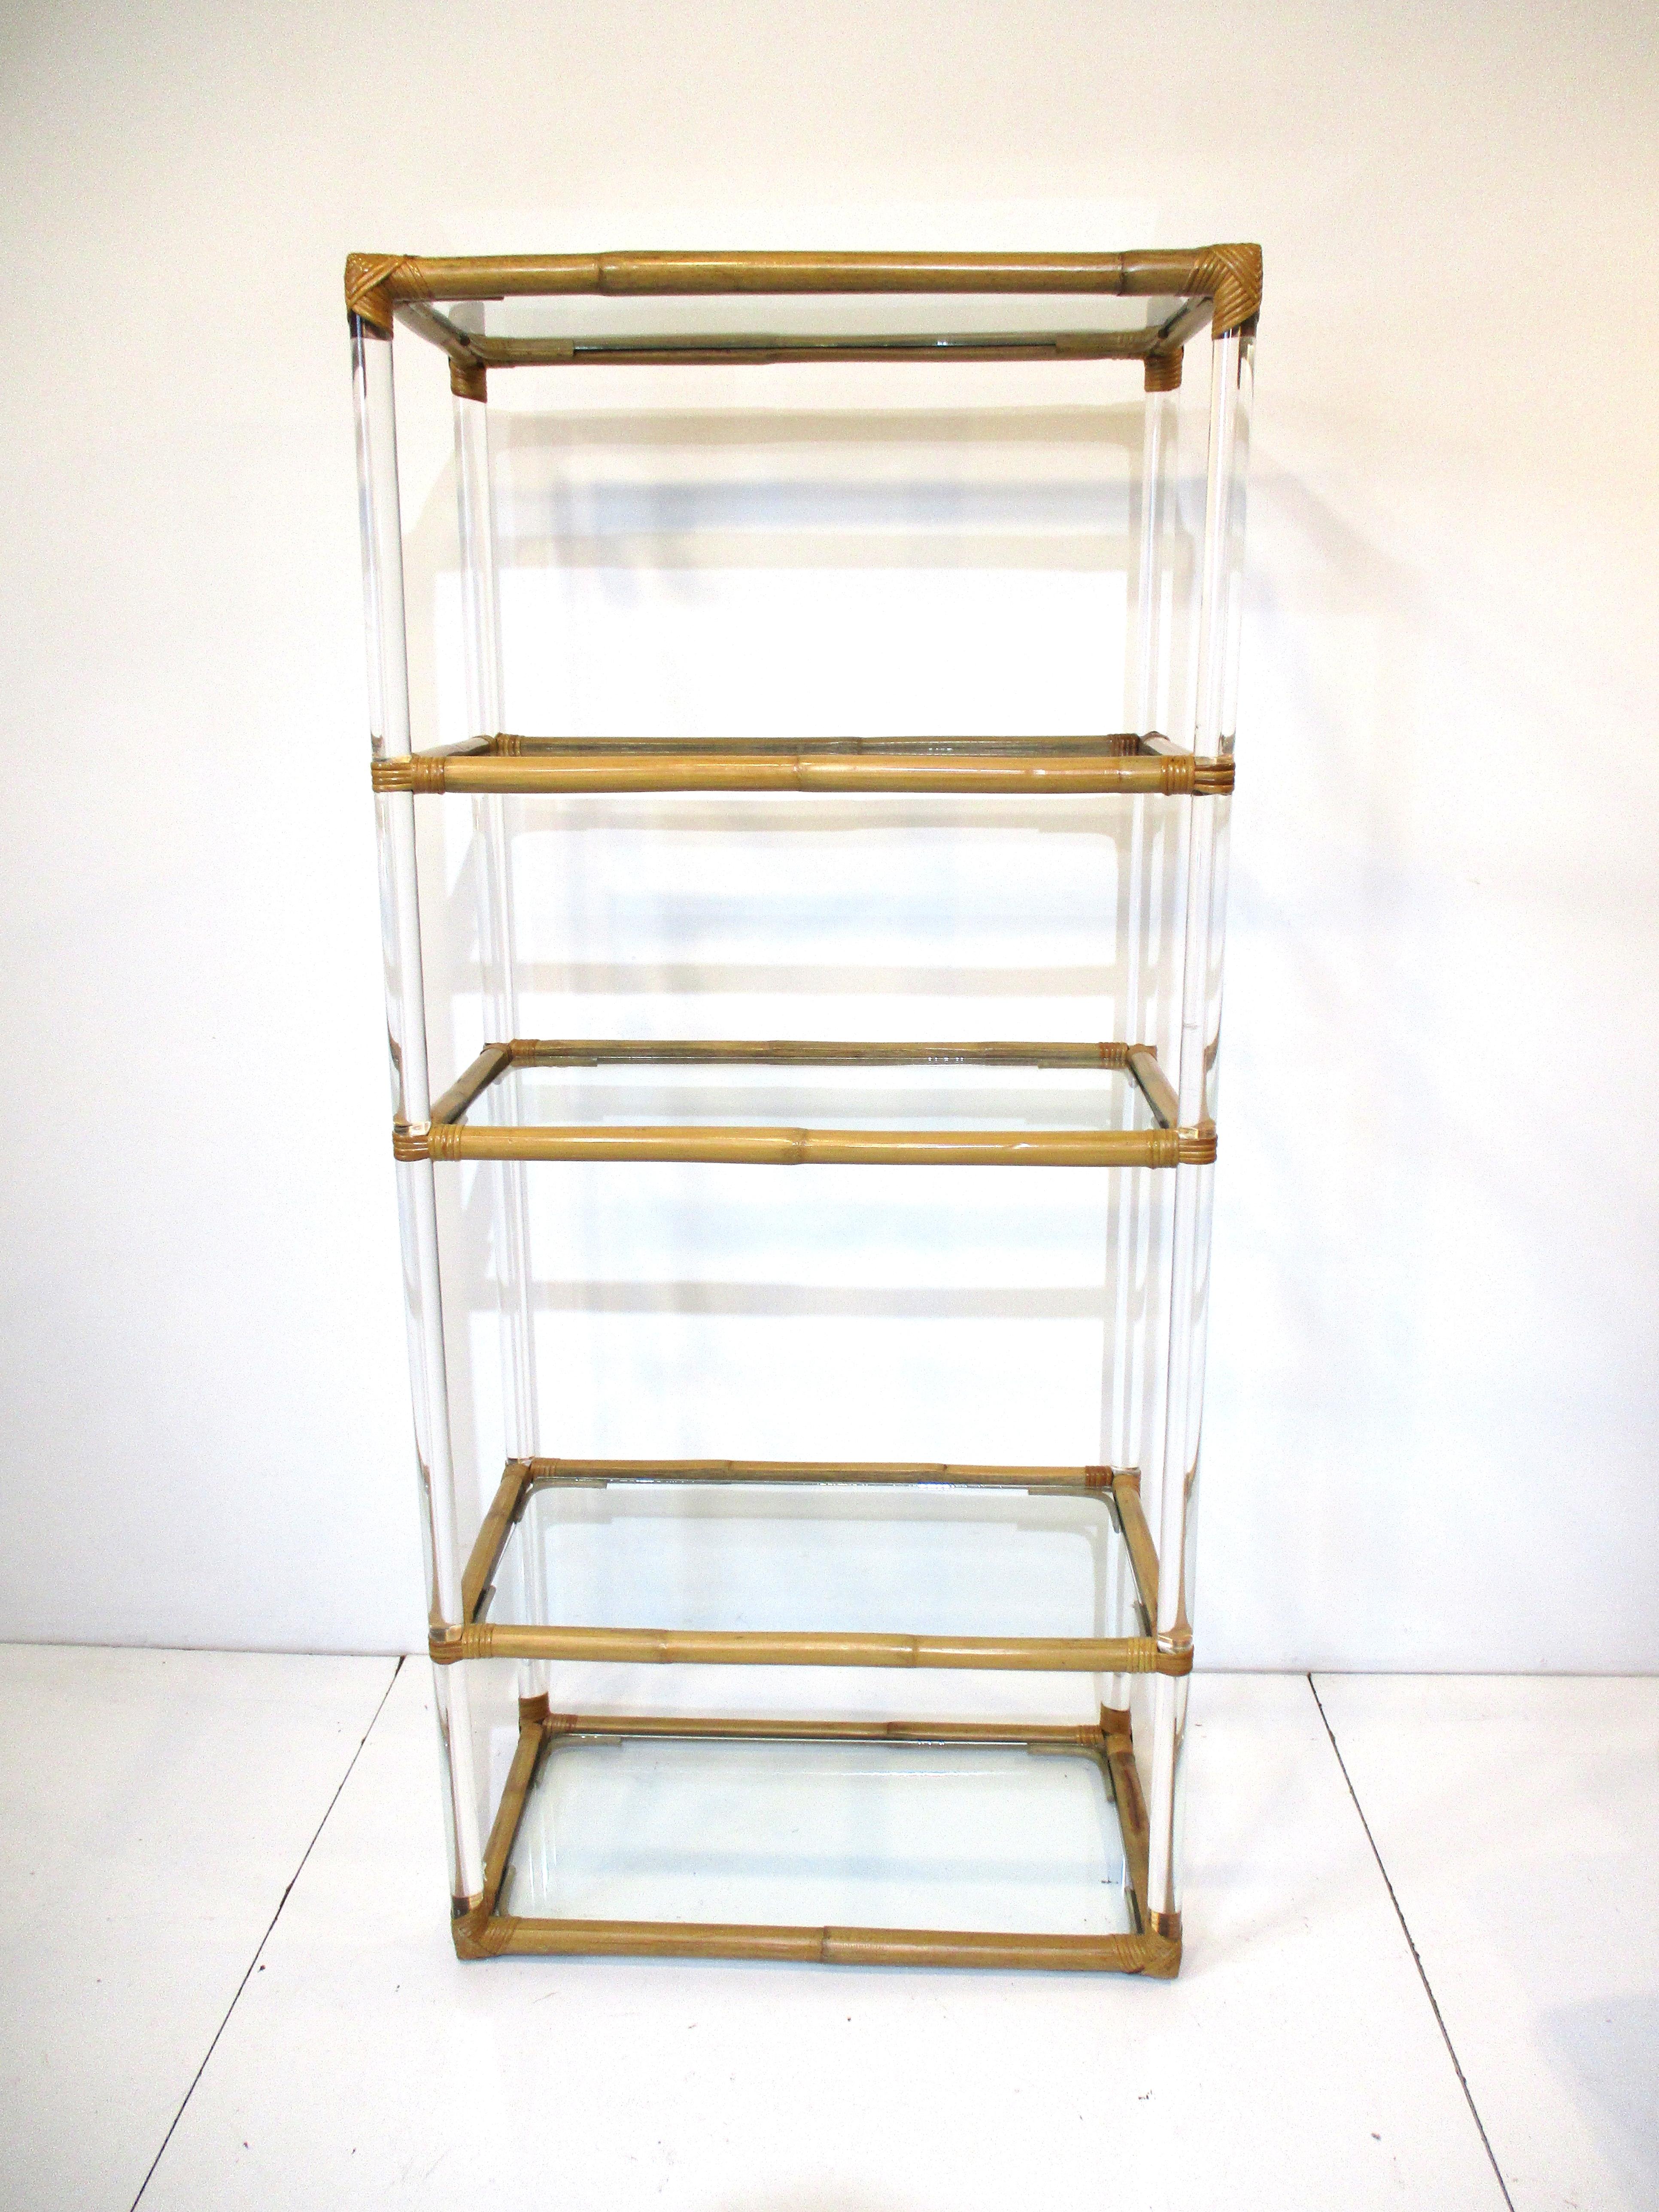 A very well crafted Etagere with clear Lucite posts straddled by hardened bamboo pieces woven to each corner making for nice detailed construction . Five glass shelves that include the top and bottom give the piece a lot of display space ,